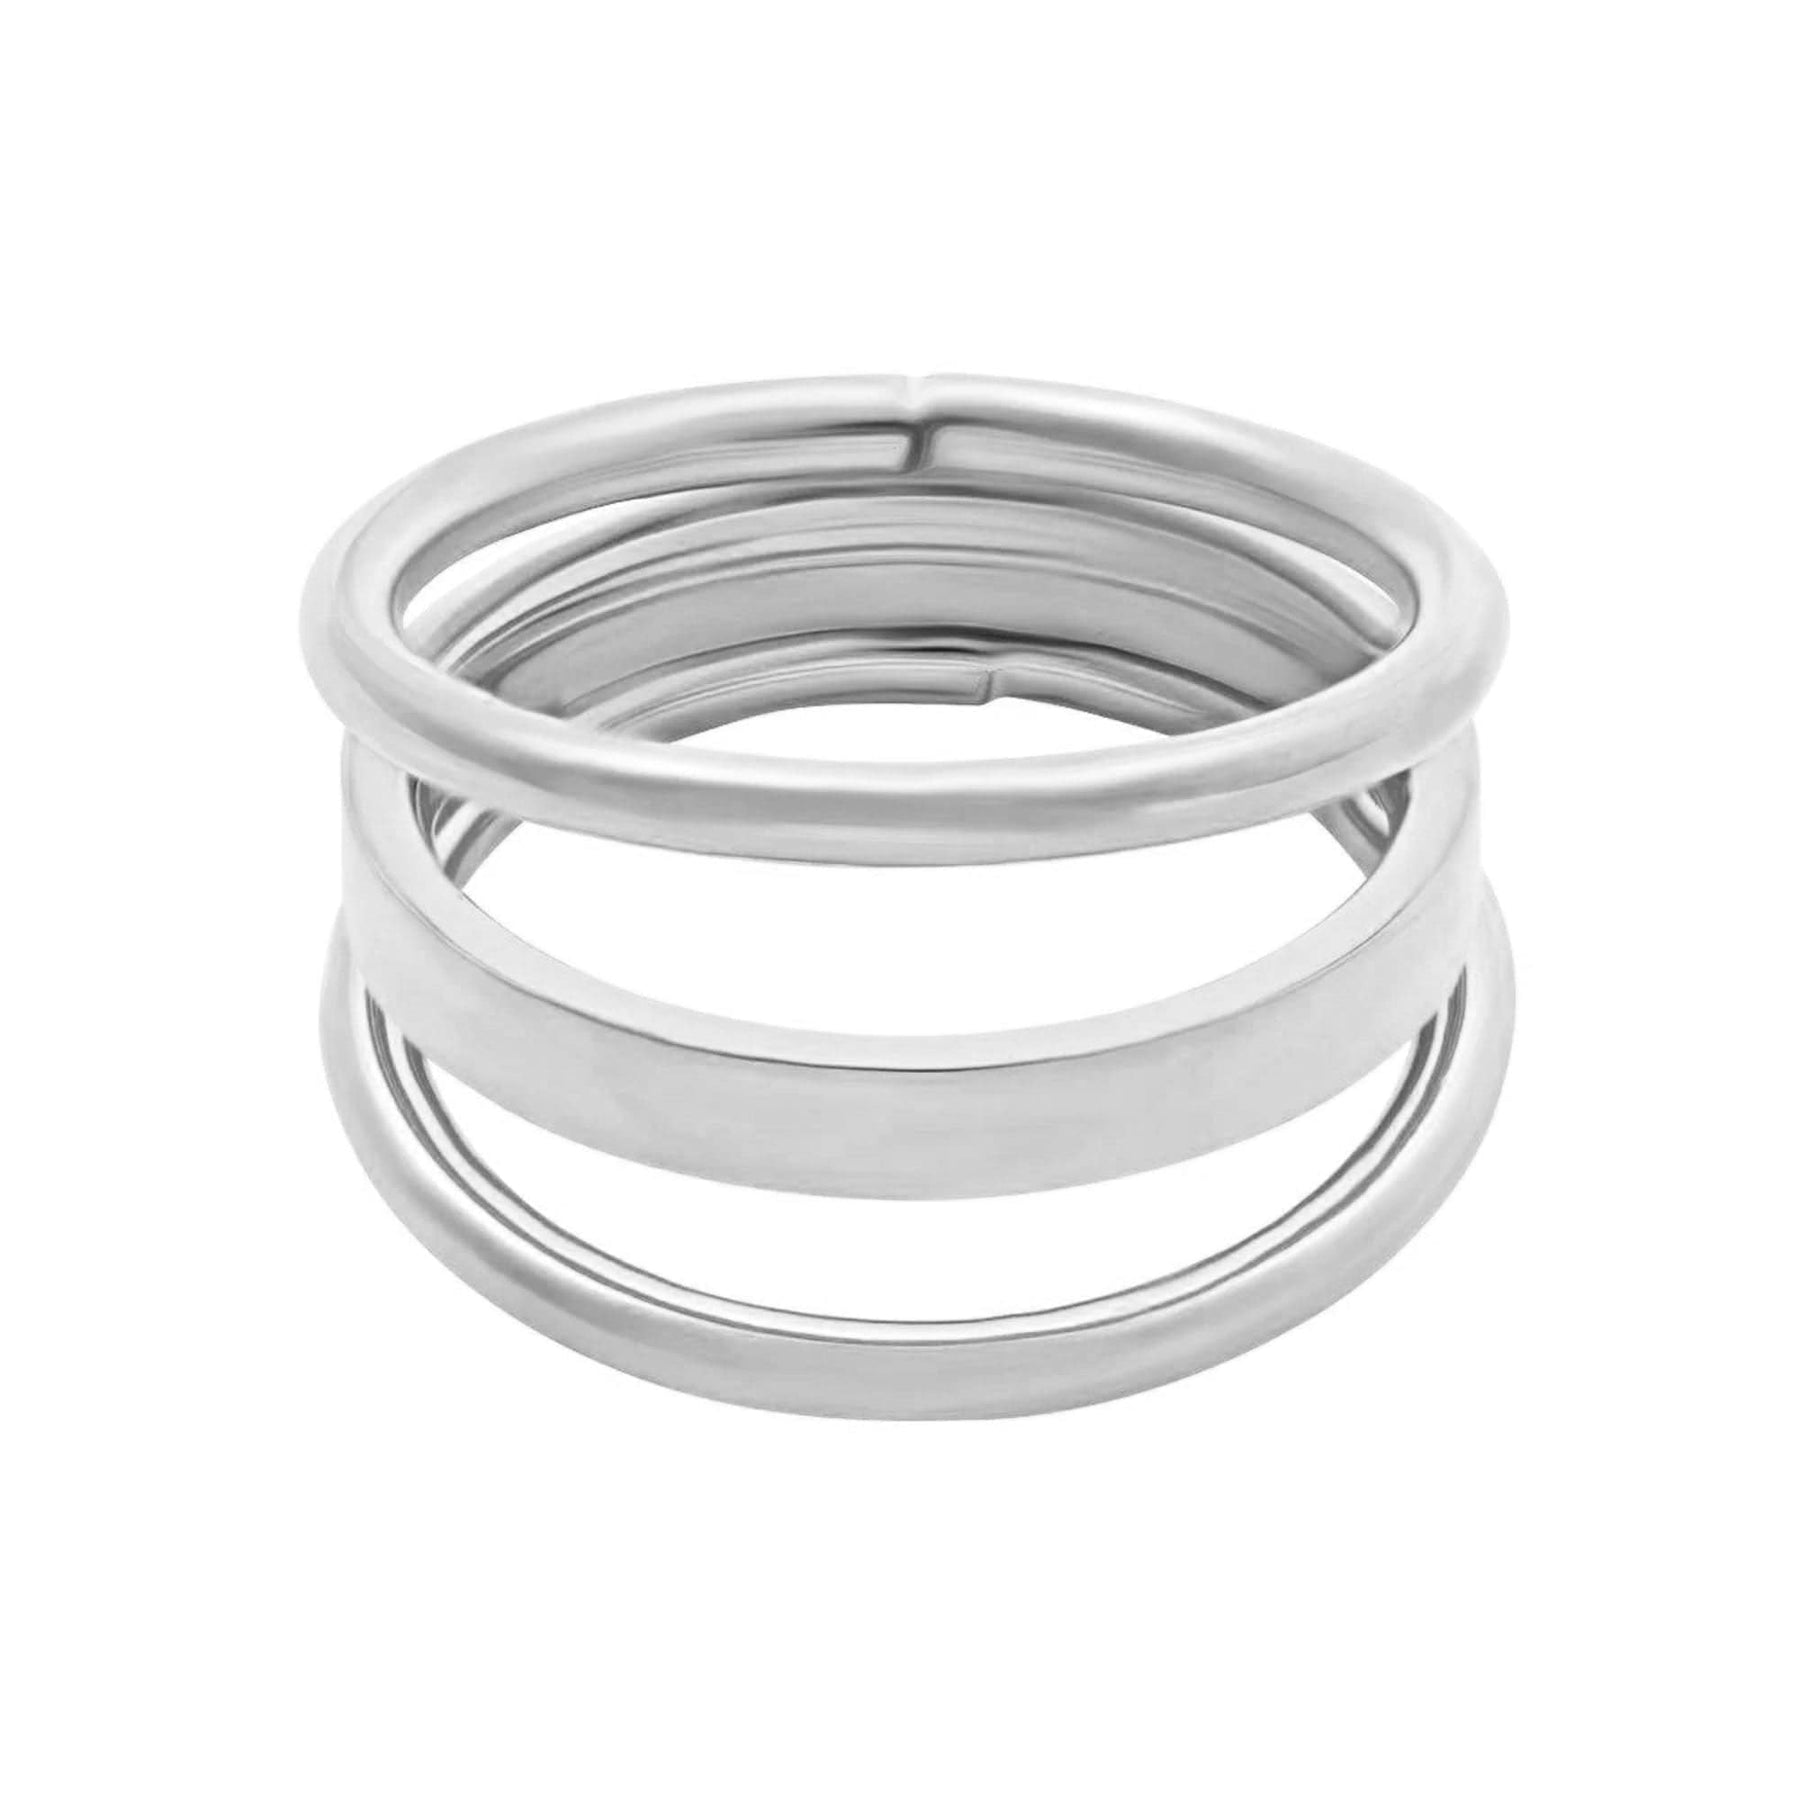 BohoMoon Stainless Steel Triple Threat Ring Silver / US 5 / UK J / EUR 49 (x small)